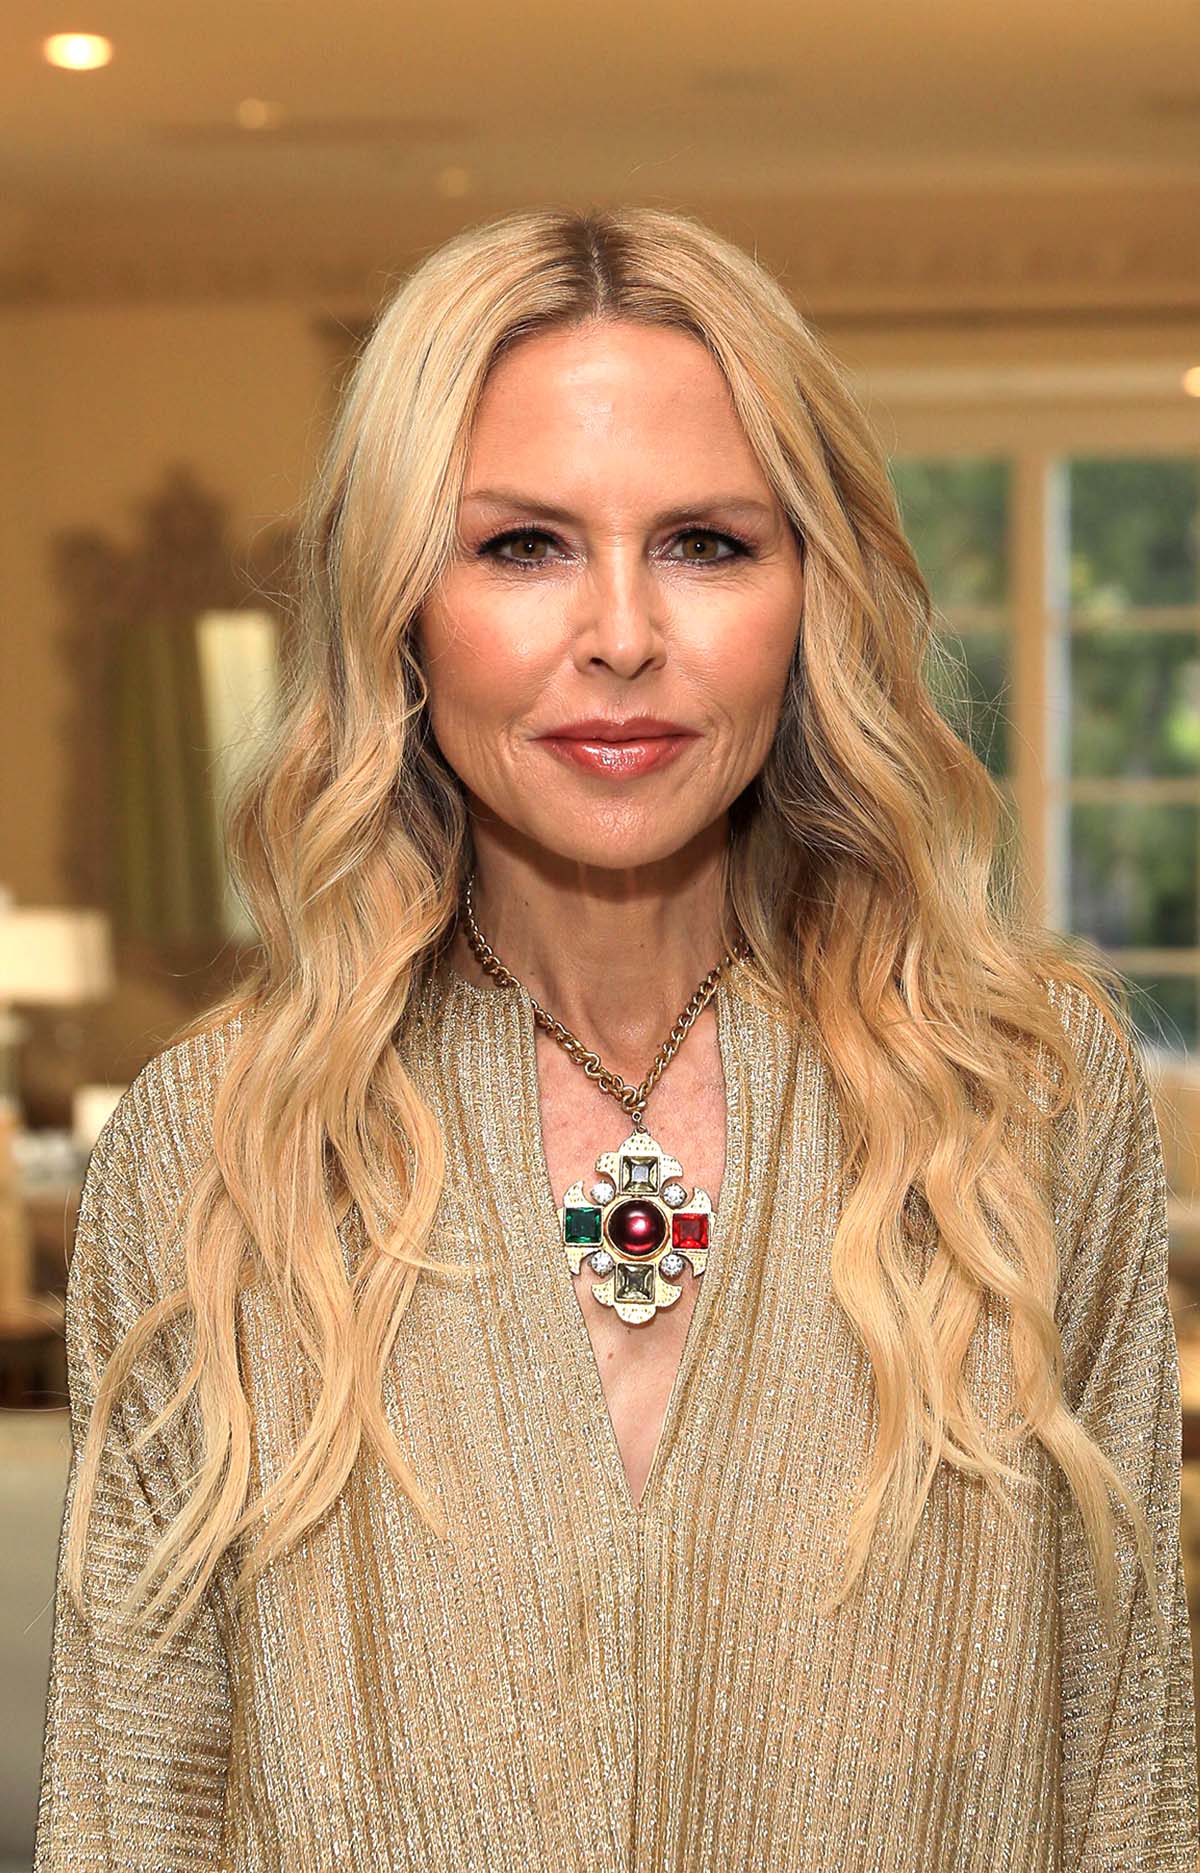 Where are they now? The Rachel Zoe Project cast.